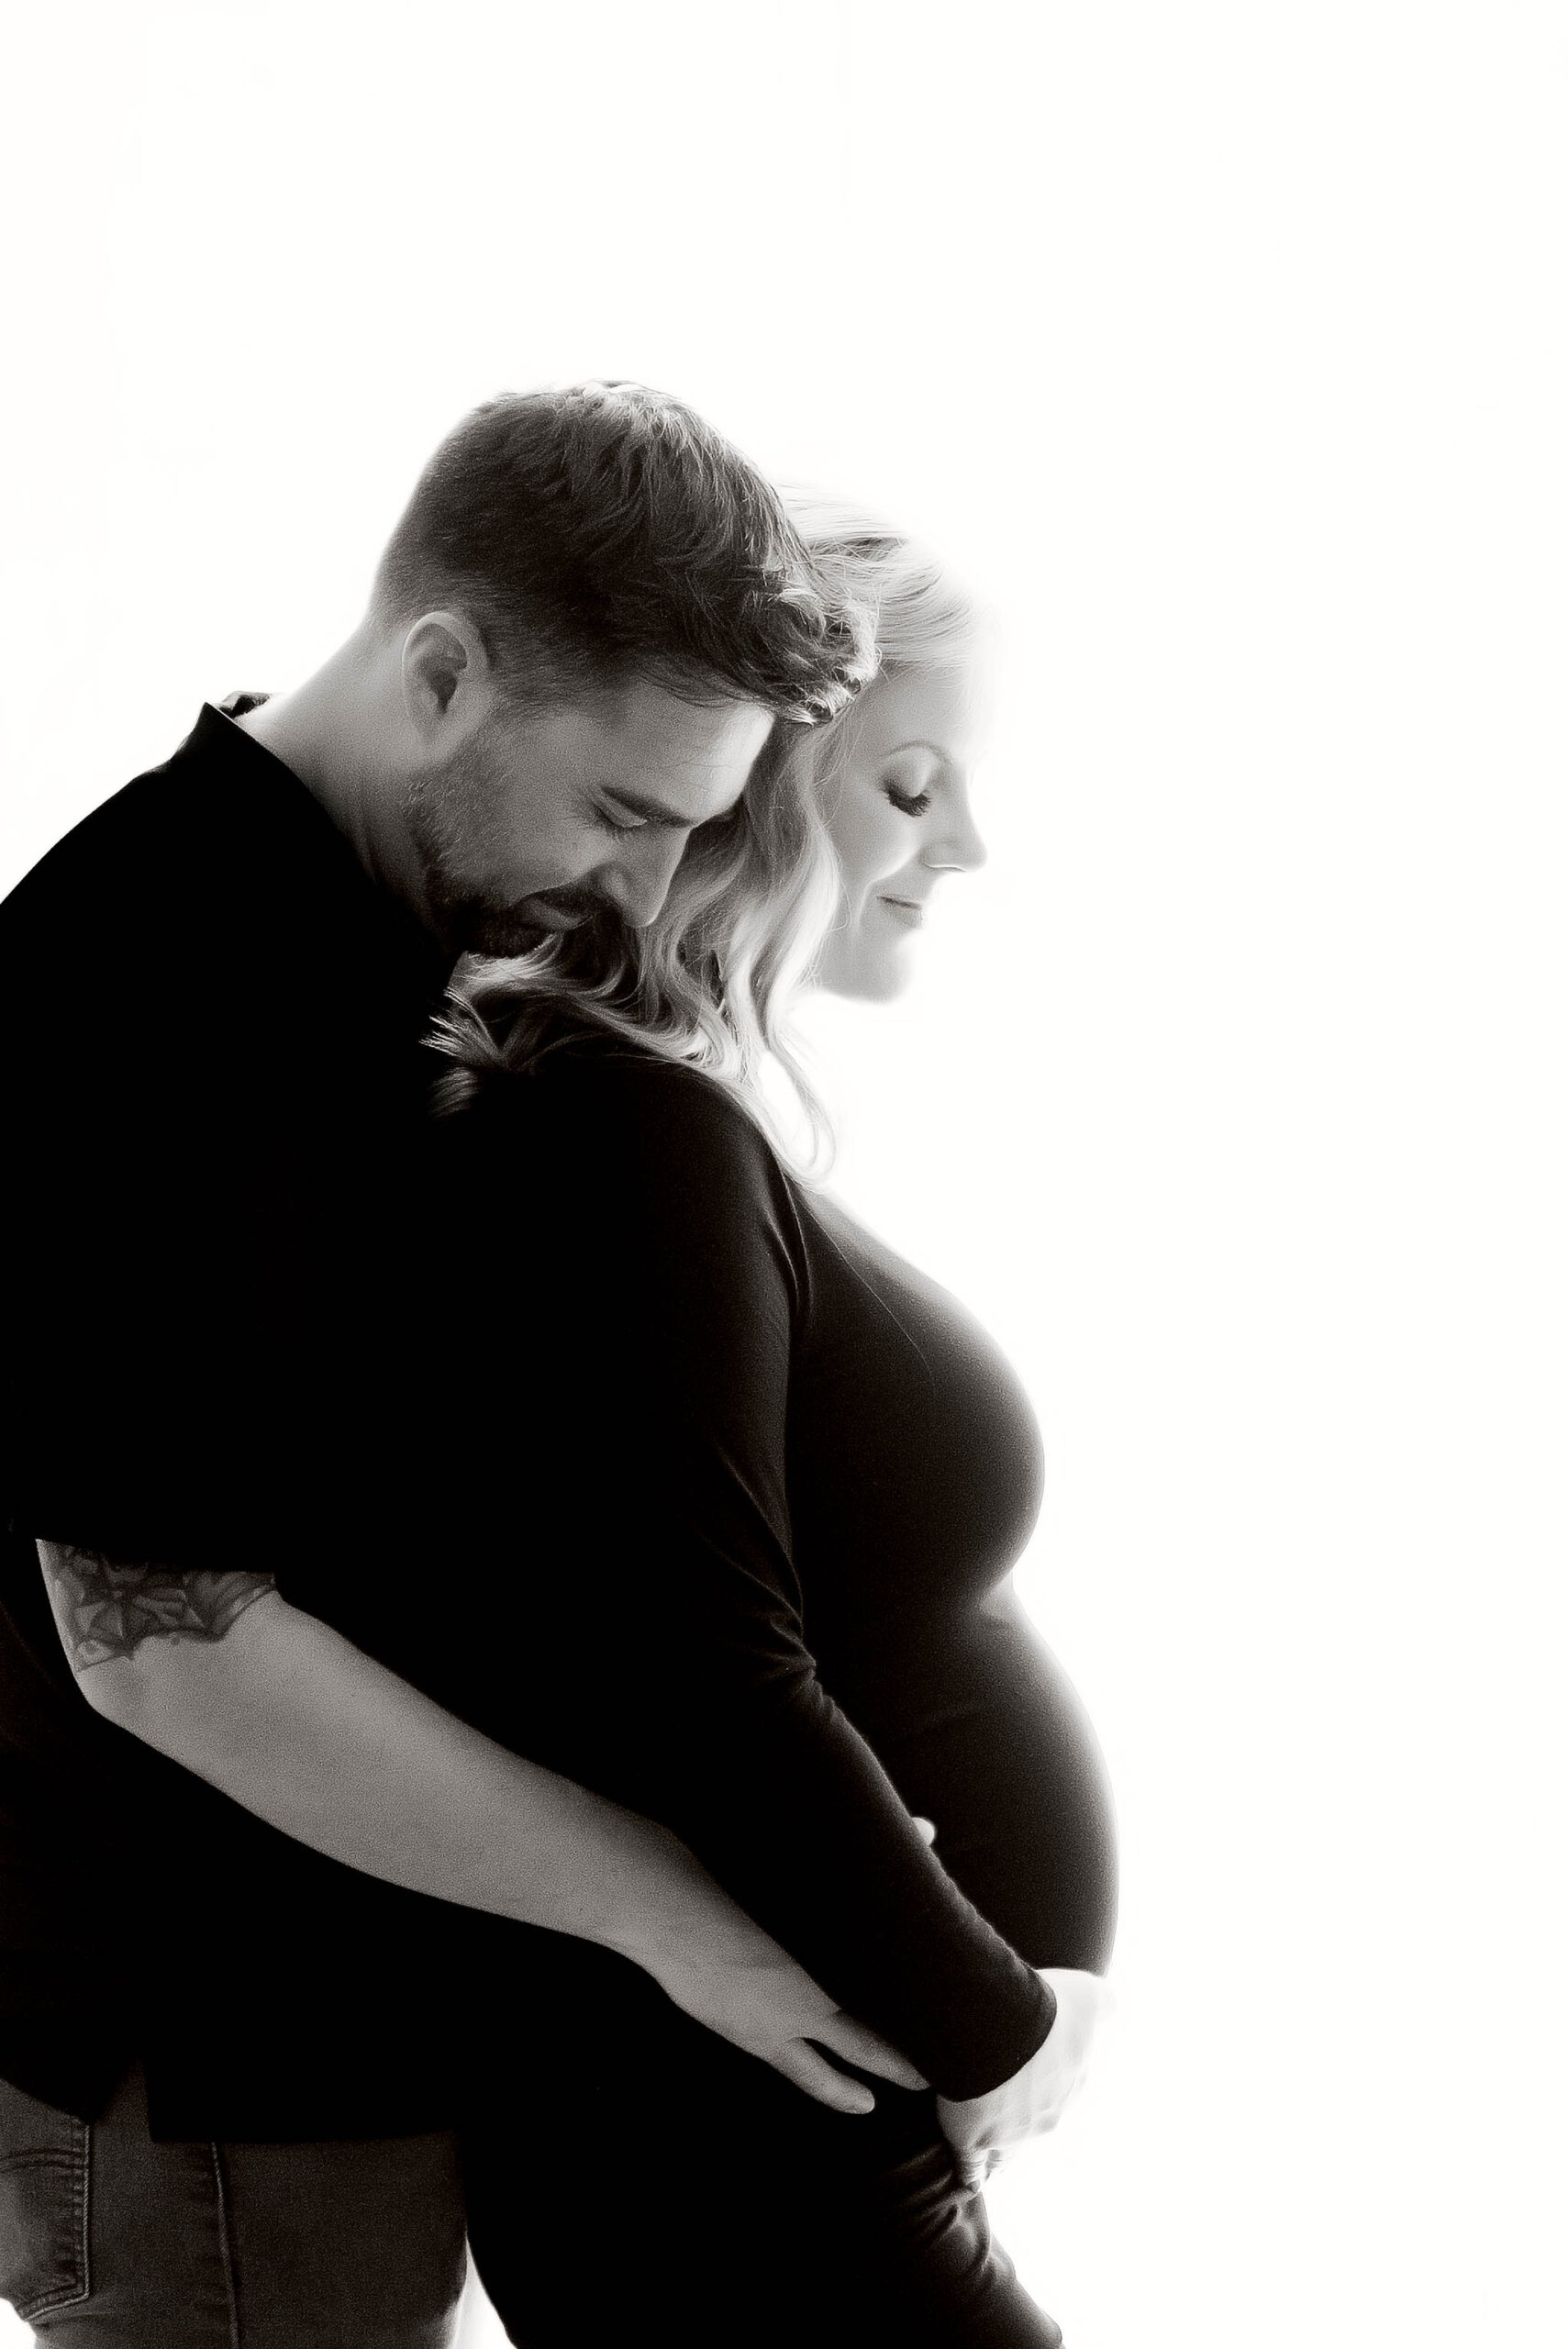 Black and White Maternity Couples Pictures - Houston Maternity Photographer